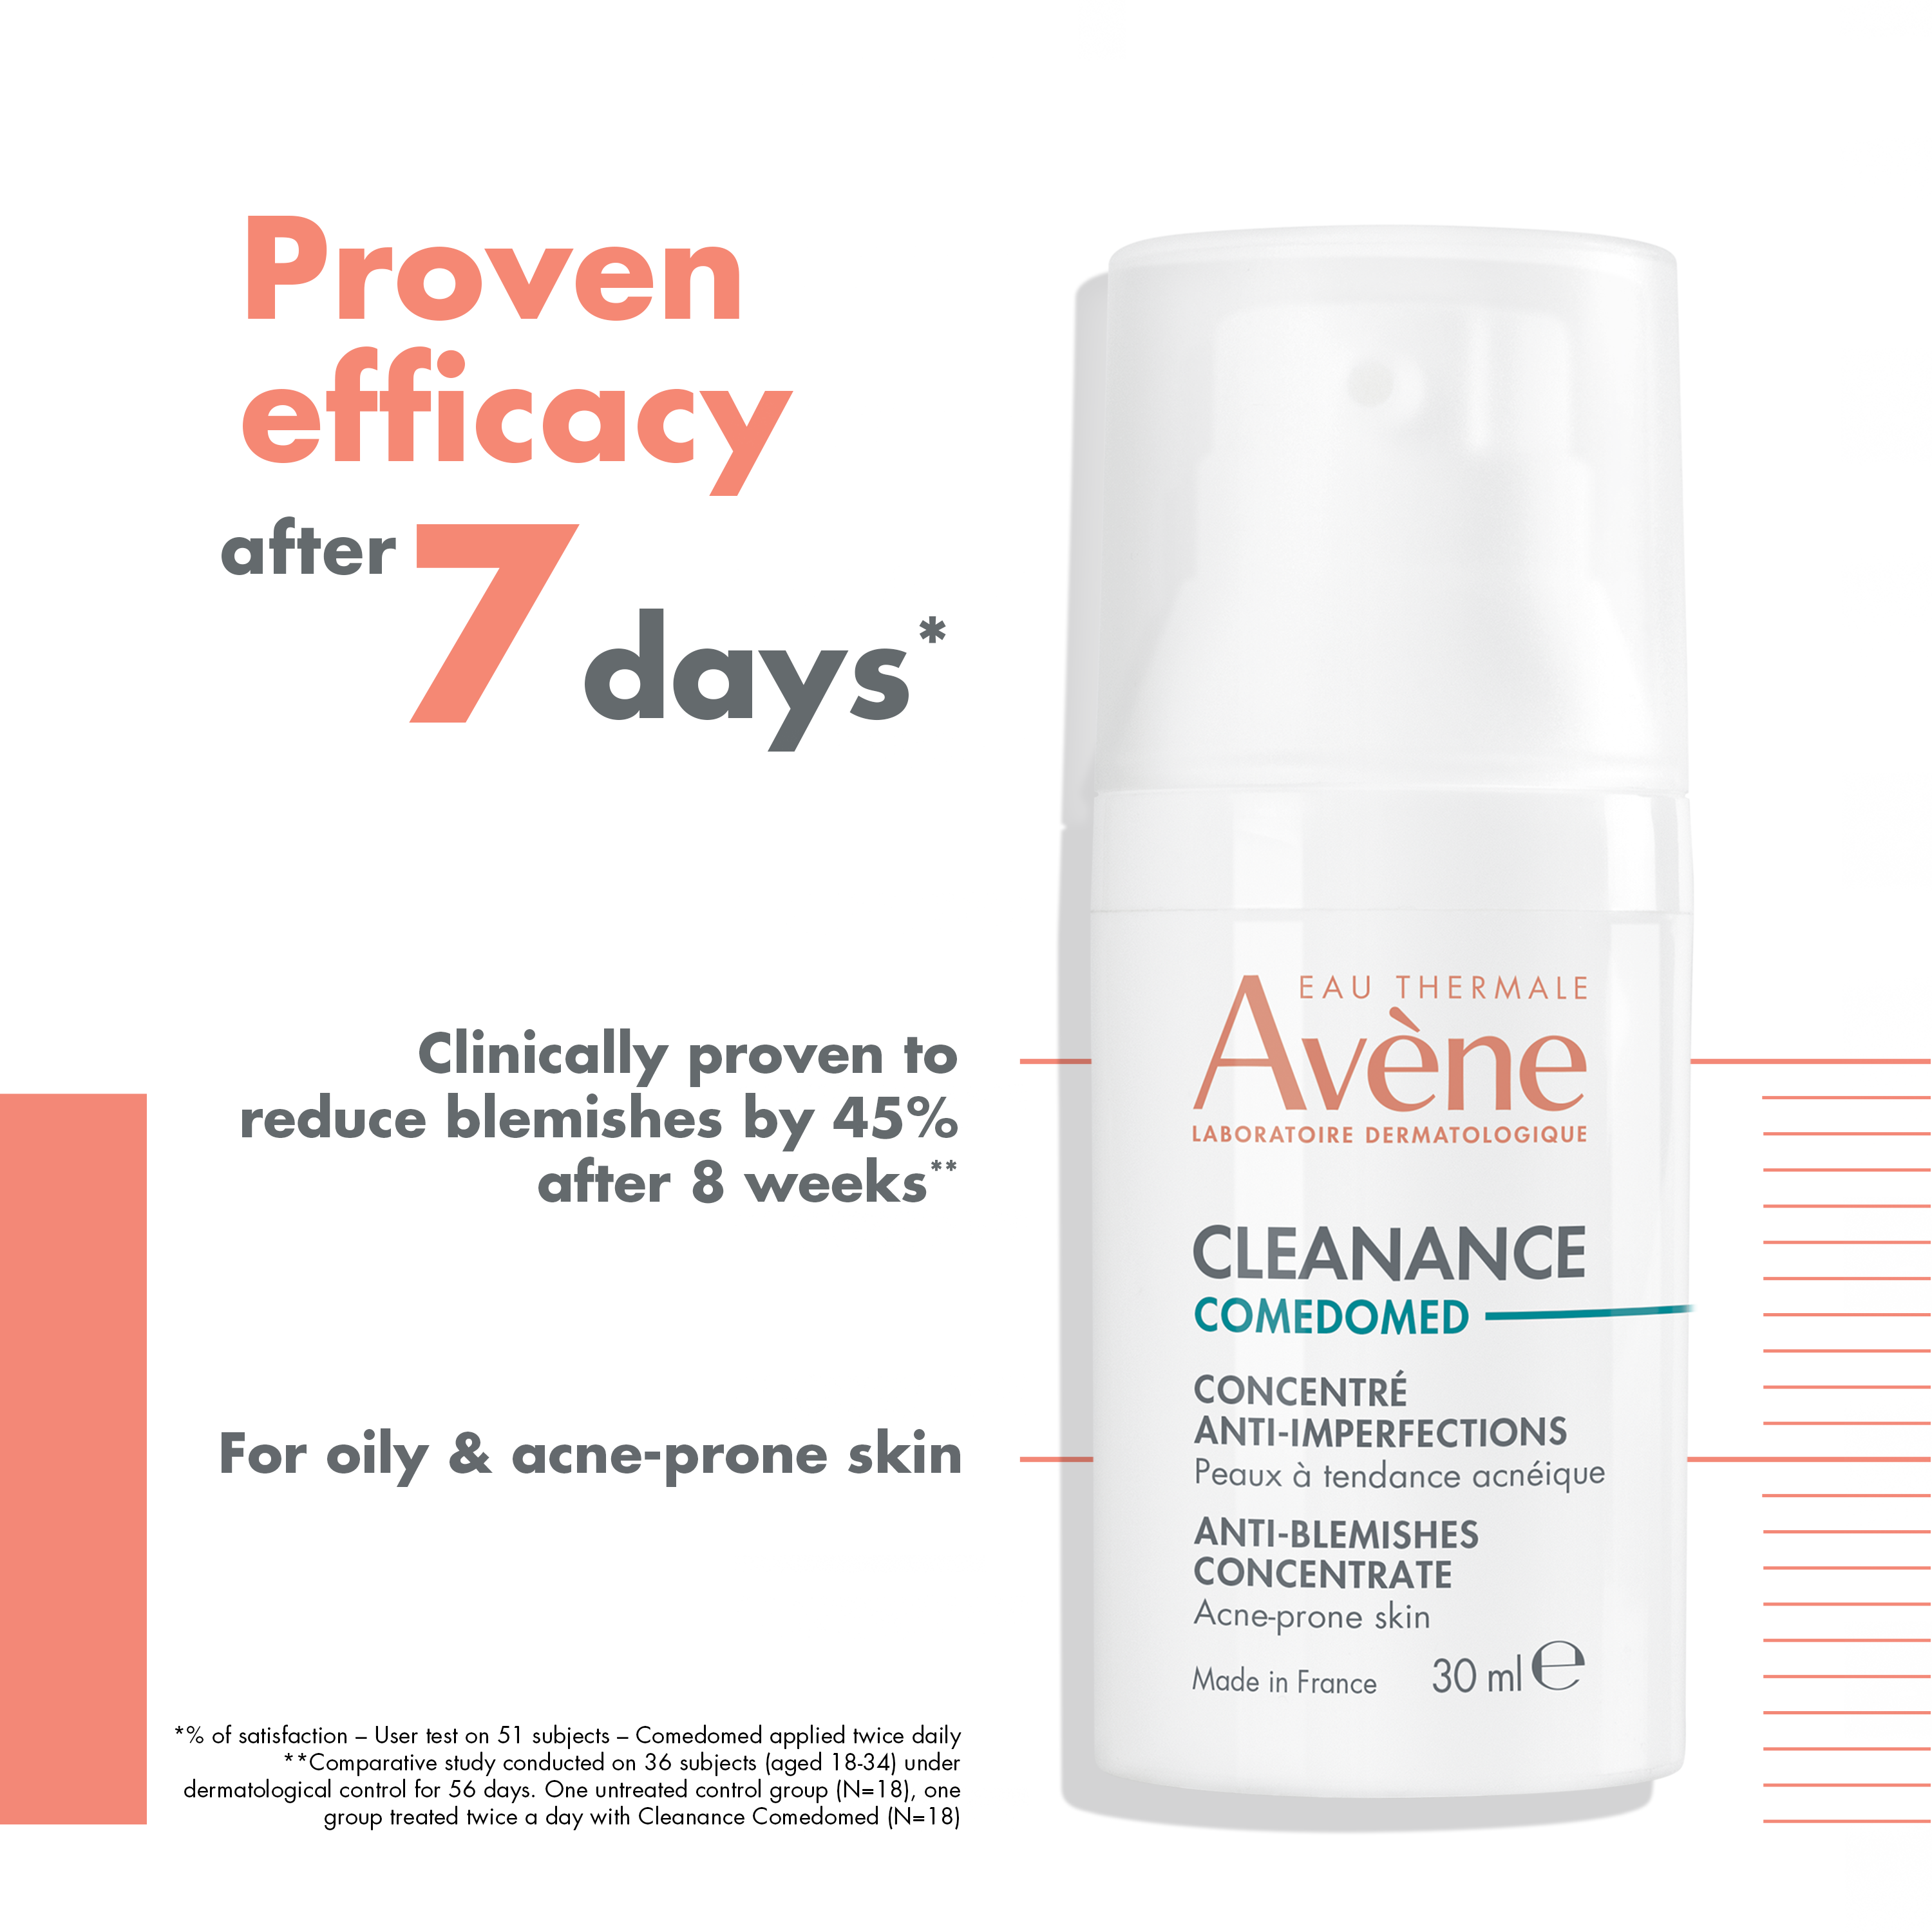 Avène Cleanance Comedomed Concentrate 30ml - Acne Moisturiser